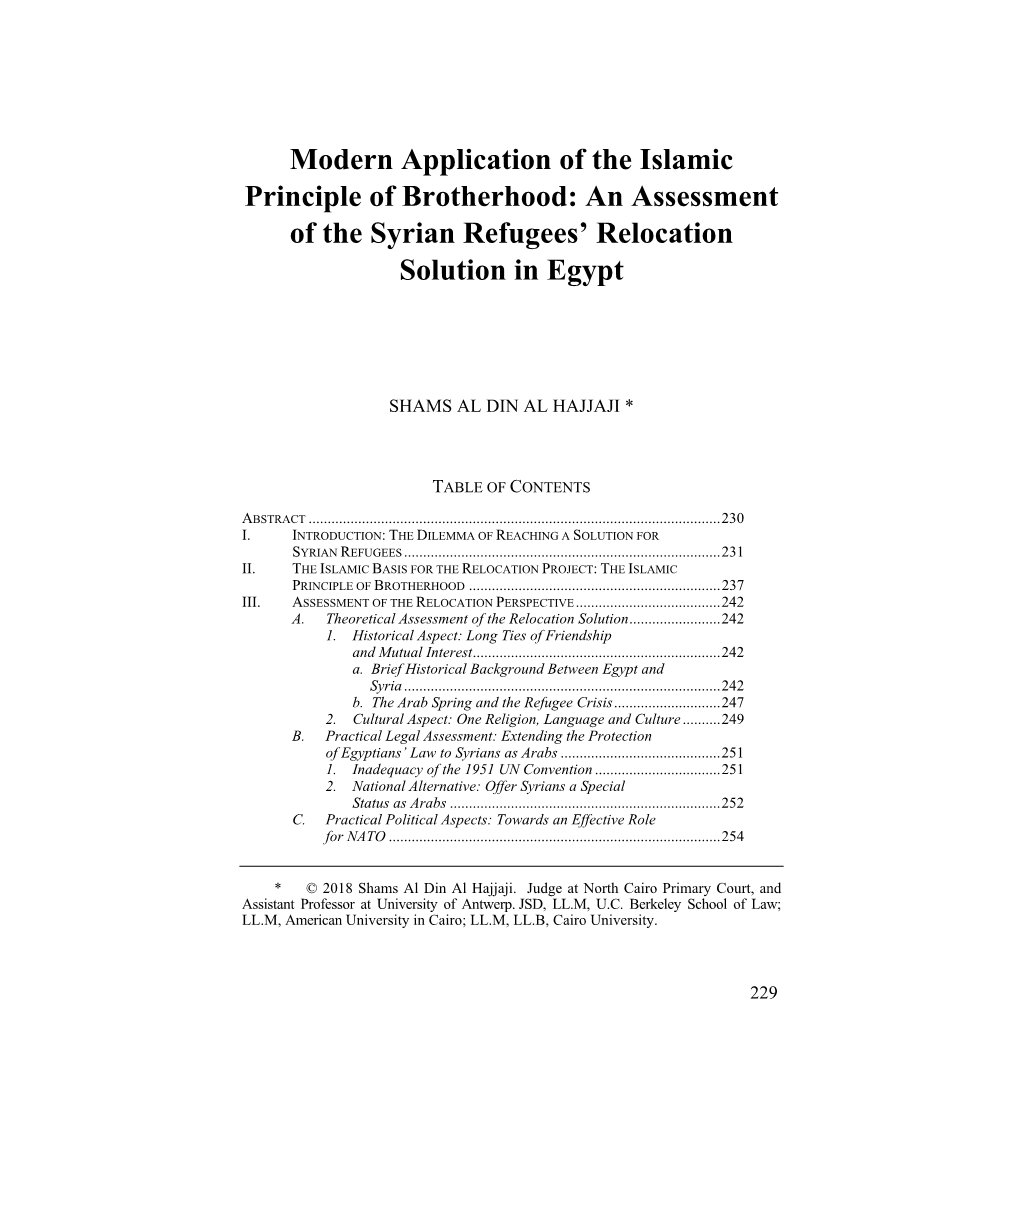 Modern Application of the Islamic Principle of Brotherhood: an Assessment of the Syrian Refugees’ Relocation Solution in Egypt